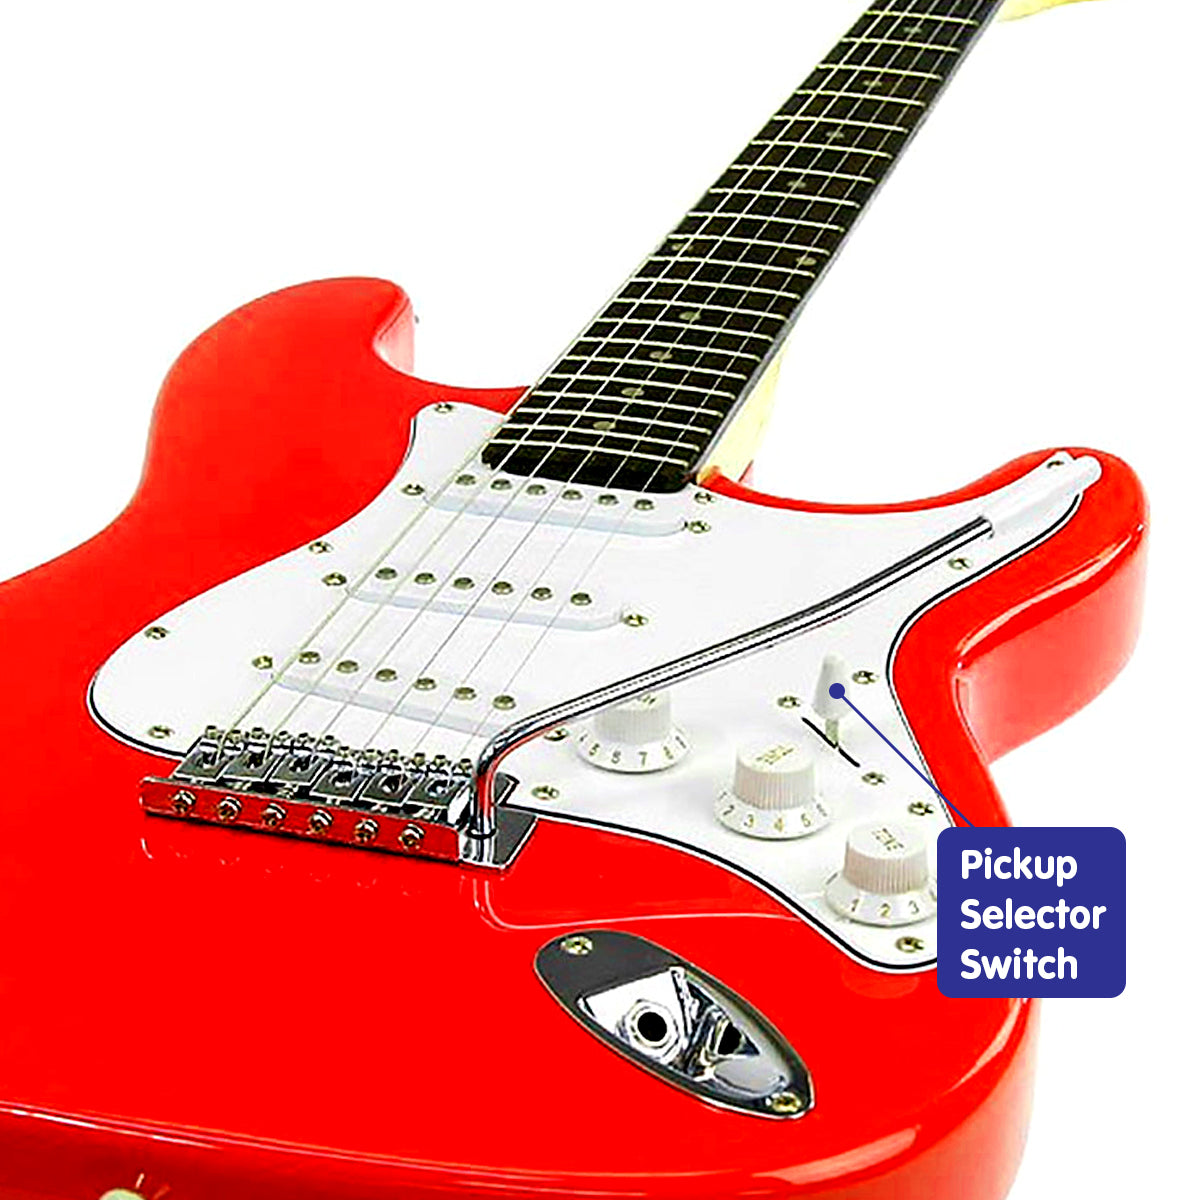 Adjustable 39in Electric Guitar, Gloss Finish - Karrera Red